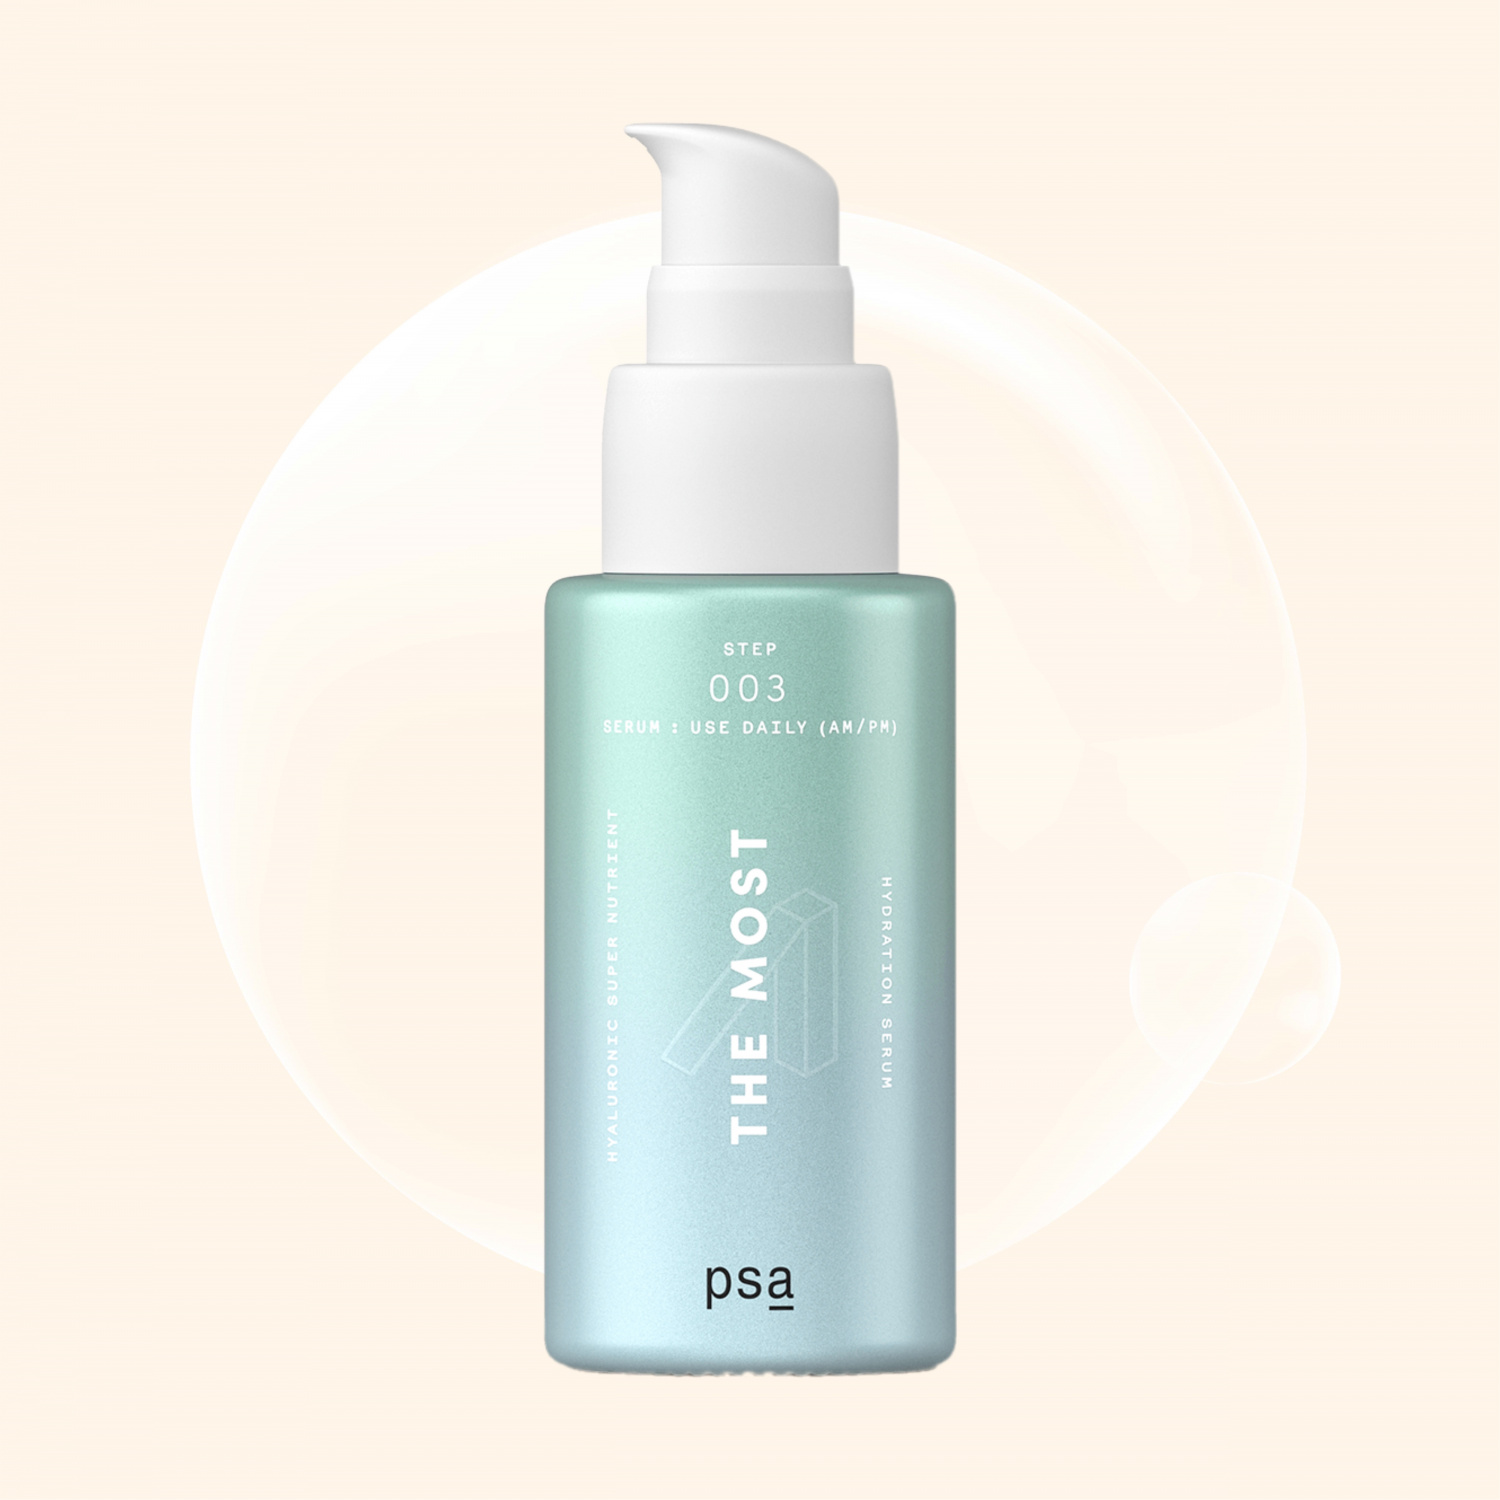 PSA the most: Hyaluronic Nutrient Hydration Serum, 30ml